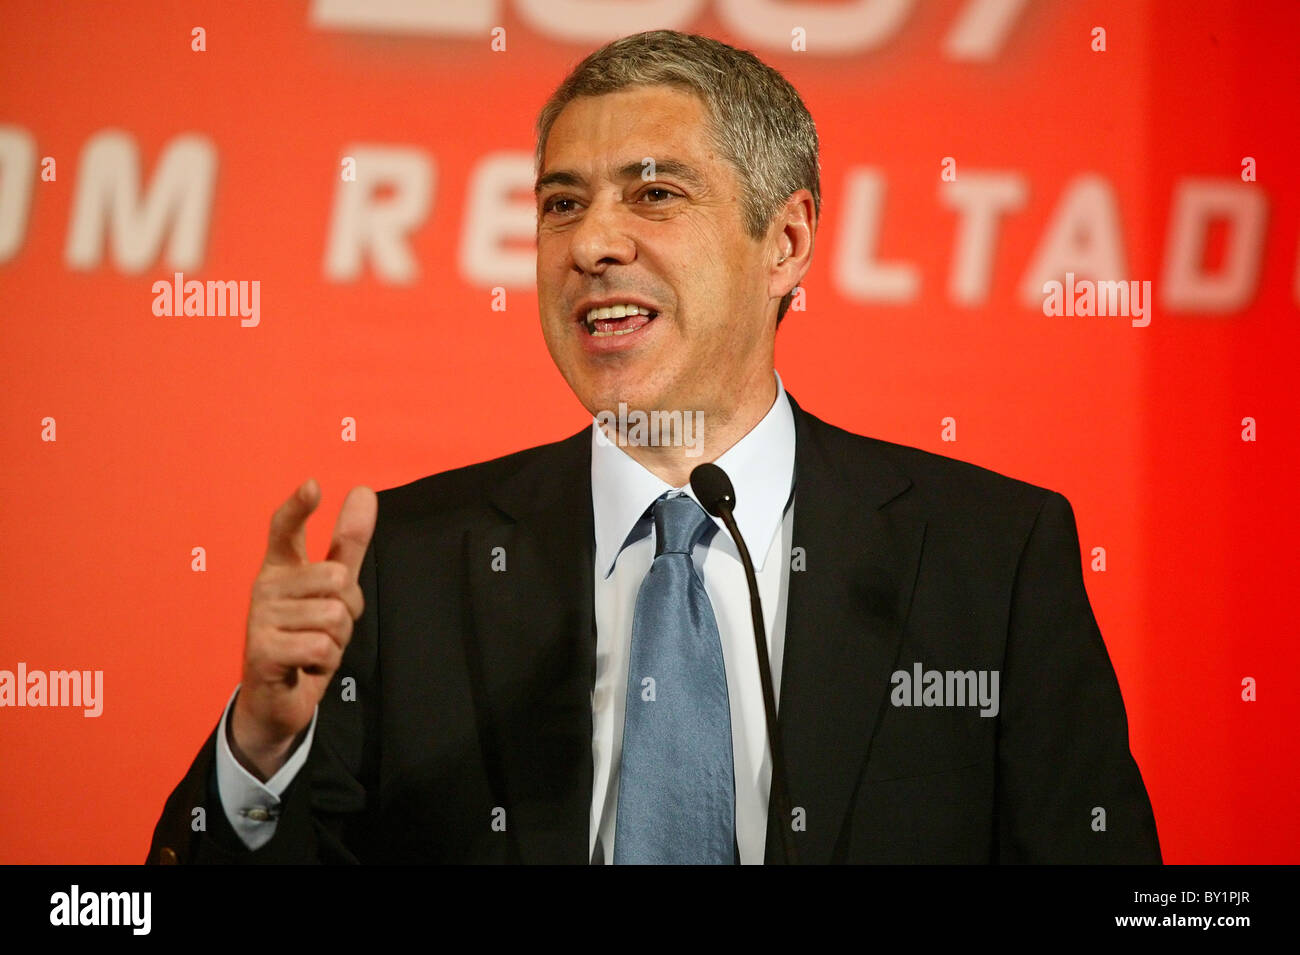 José Sócrates, former portuguese prime minister and ex leader of the socialist party PS giving a speech Stock Photo